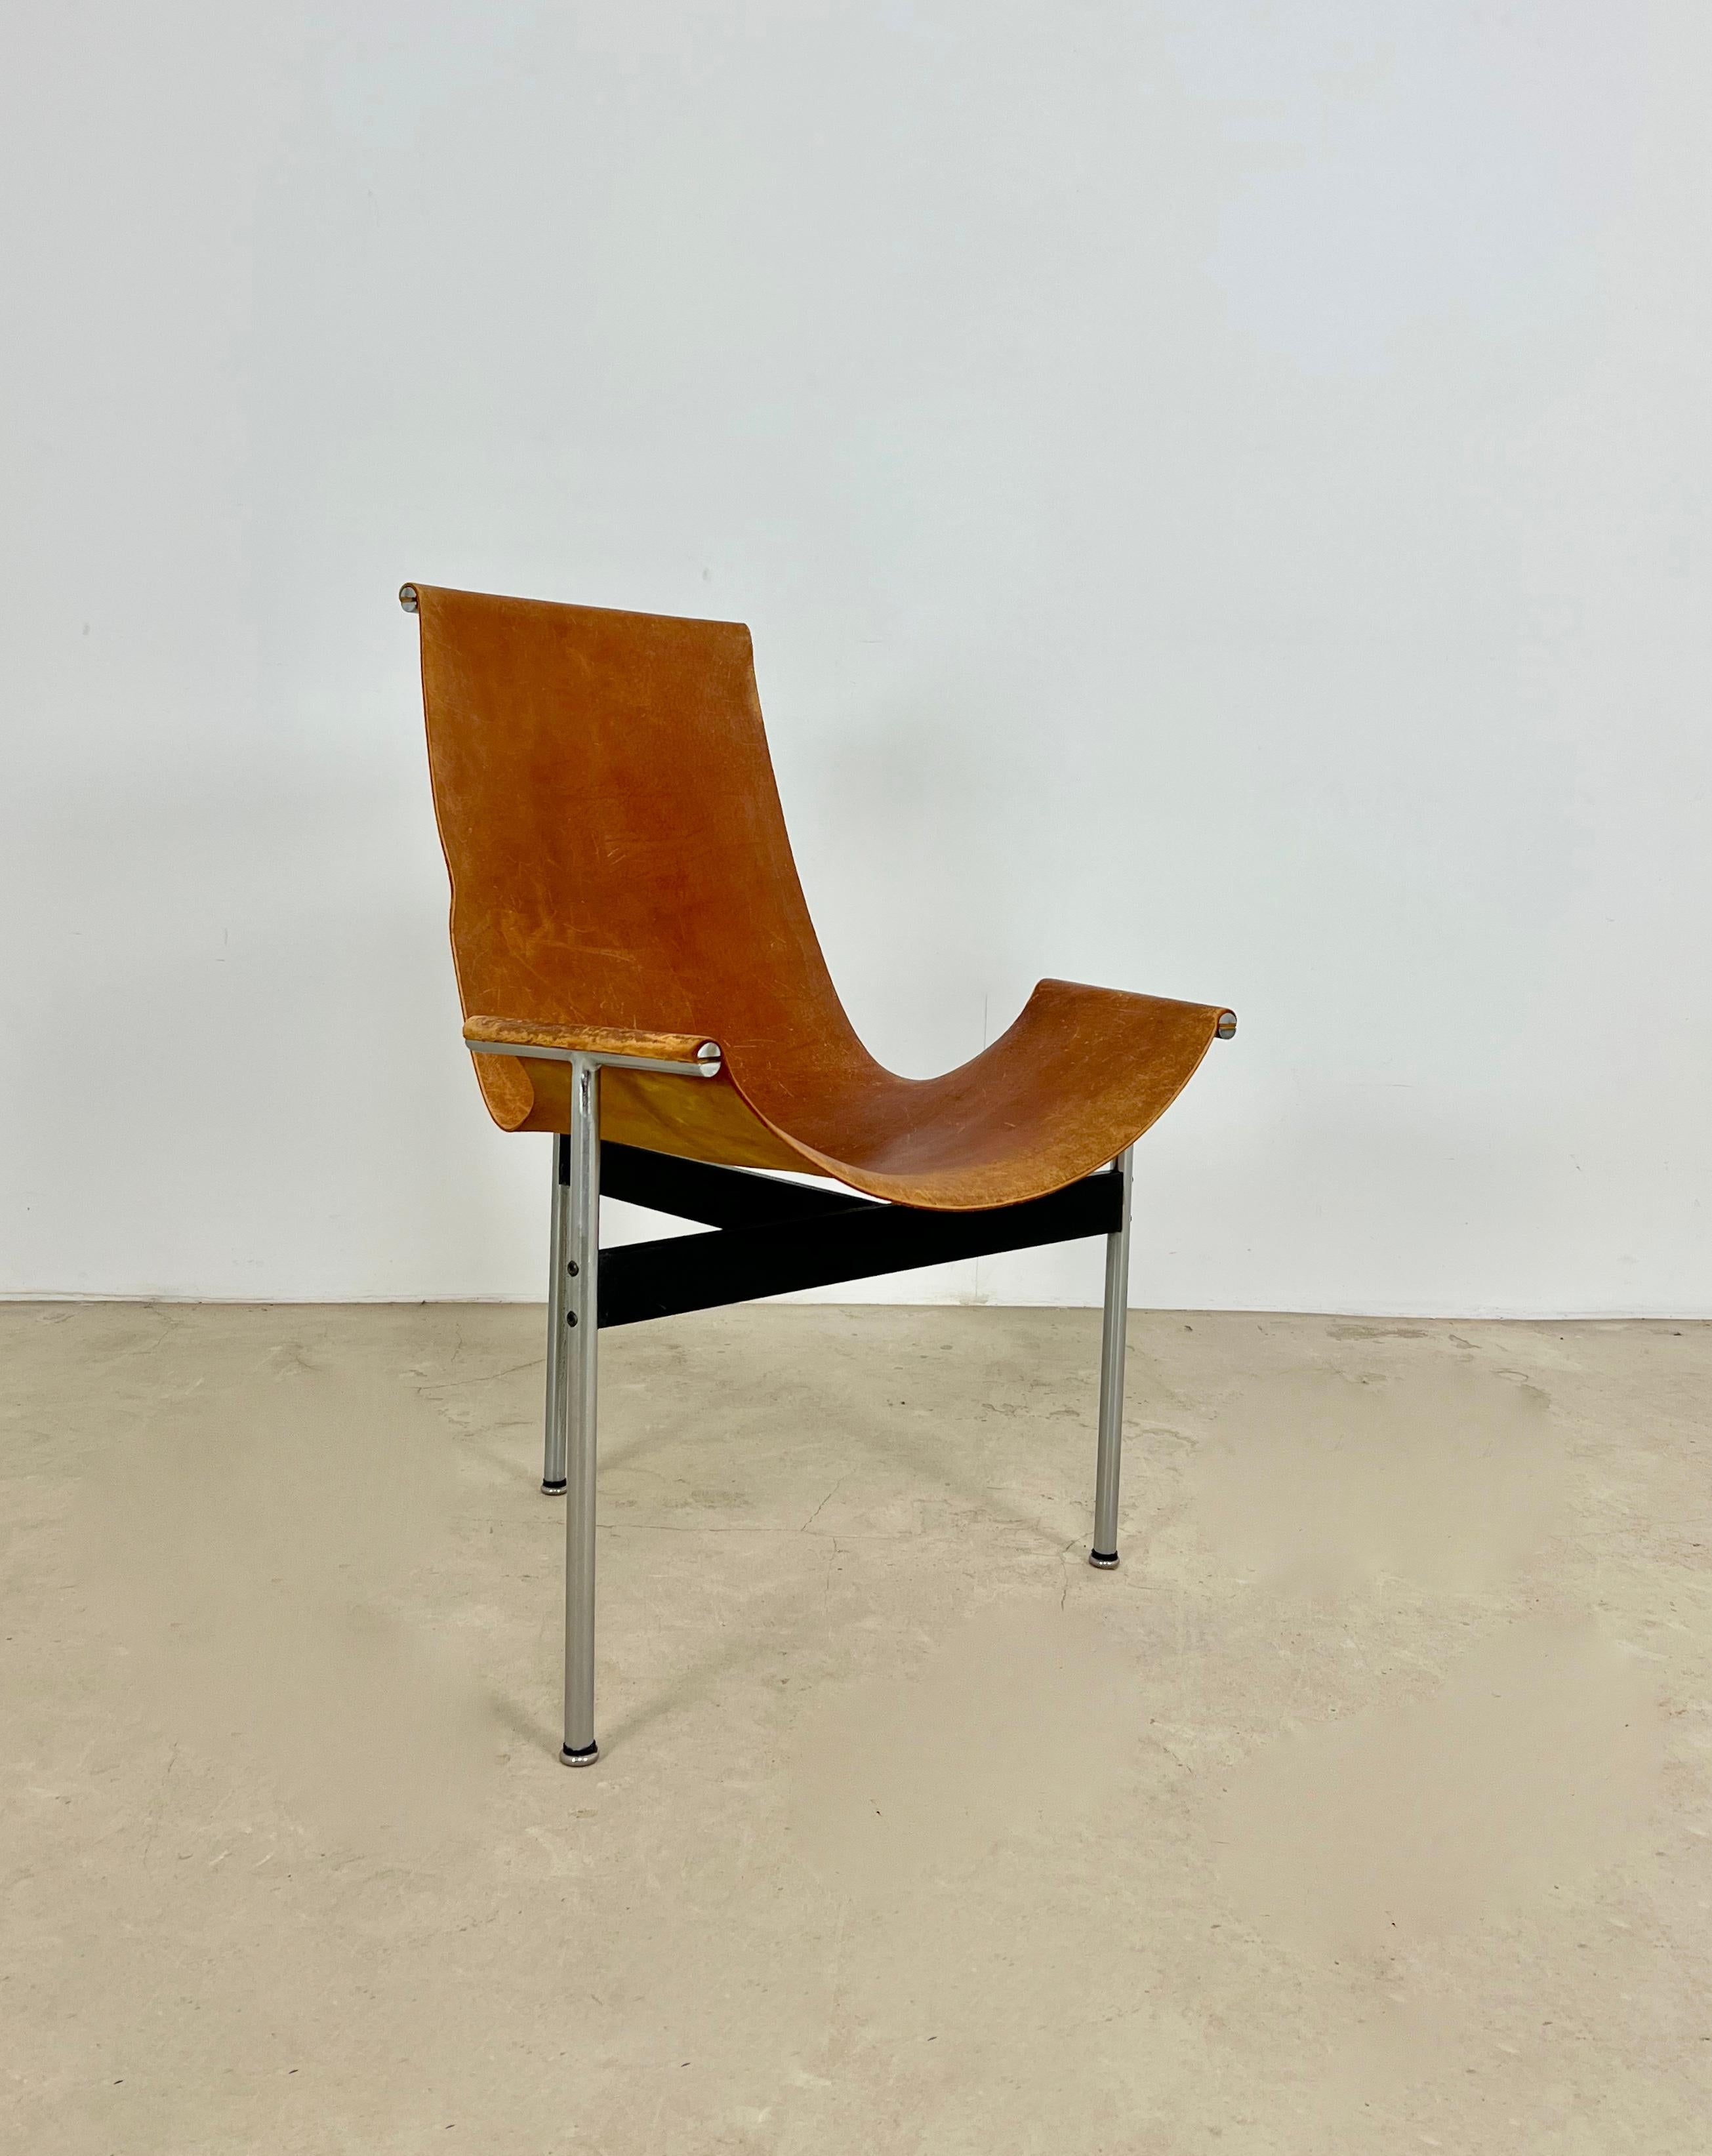 Chair in metal and leather of brown color. Measure: Seat height: 40cm. Wear due to time and age of the chair.